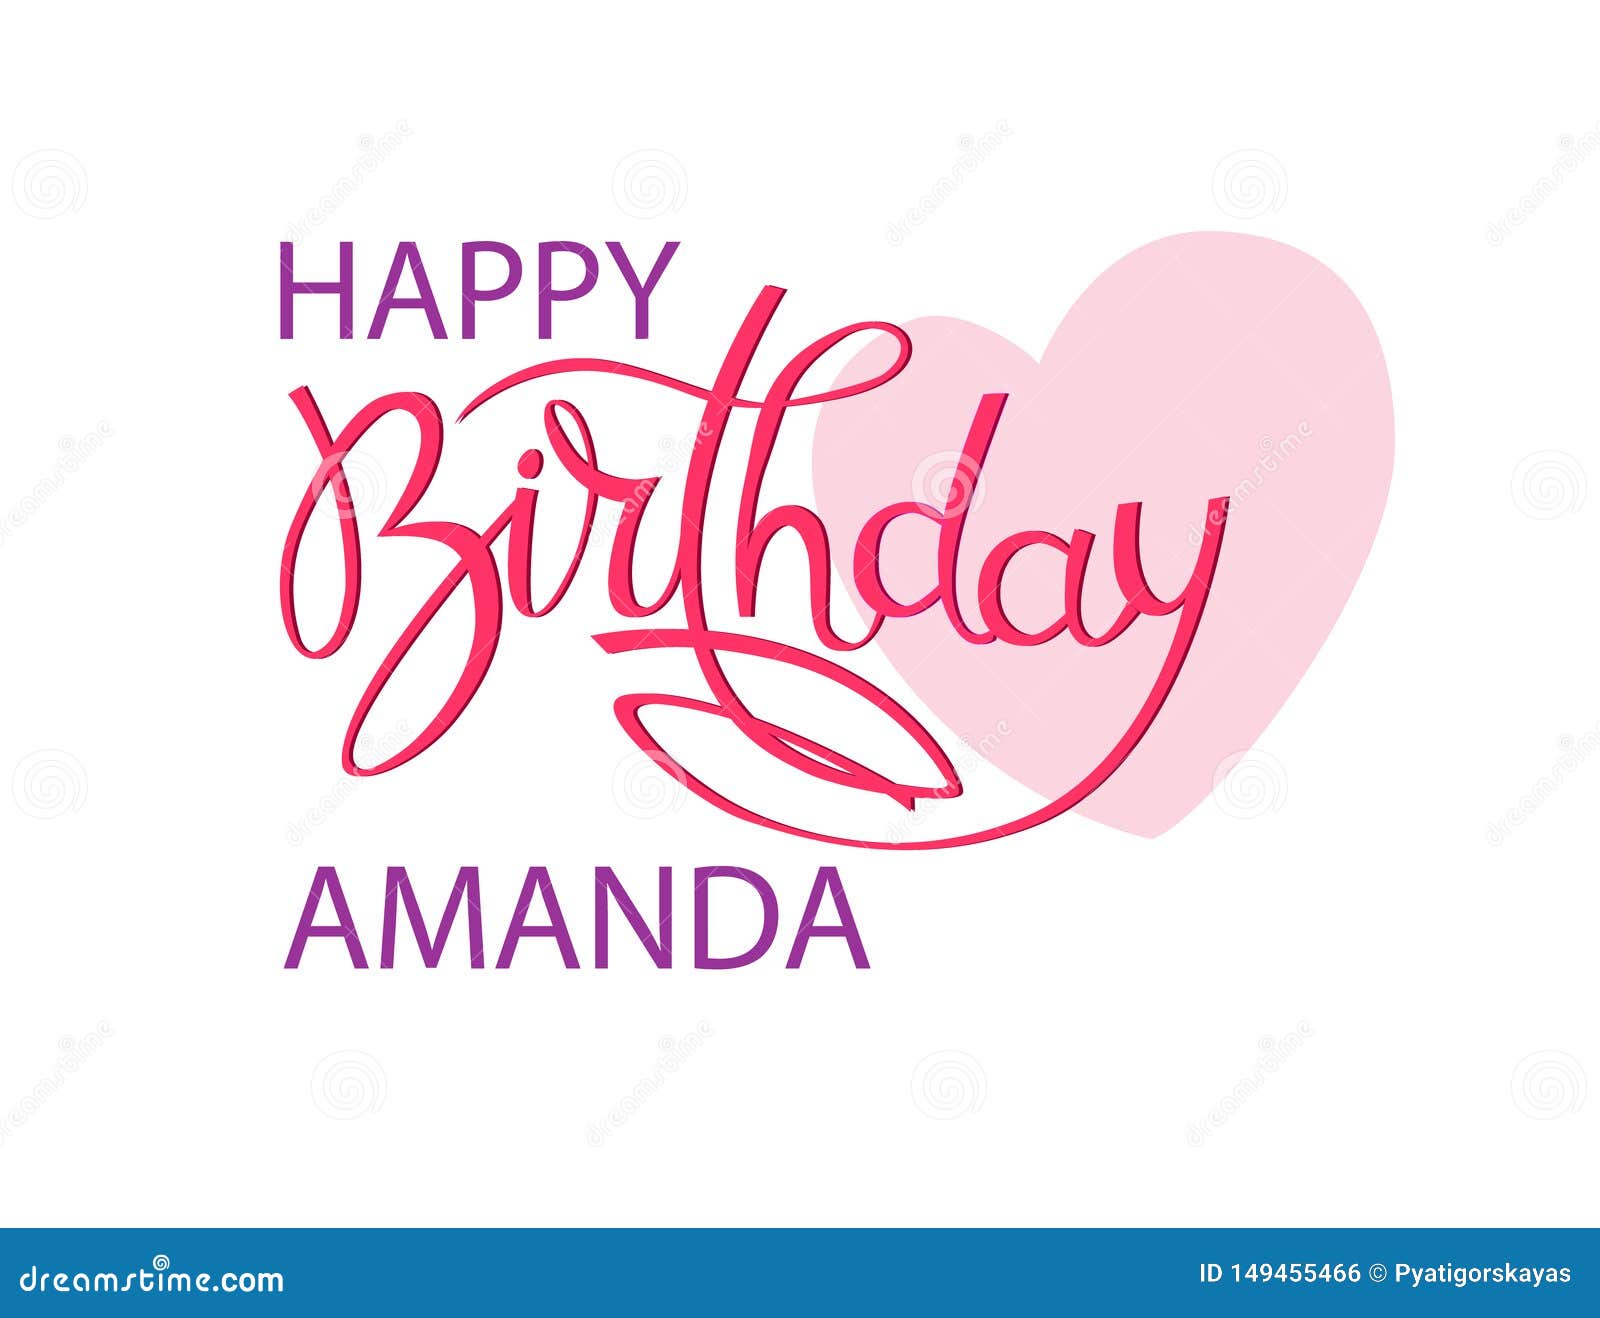 Birthday Greeting Card with the Name Amanda. Elegant Hand Lettering and a Big Pink Heart. Isolated Design Element Stock Vector - Illustration of american, lettering: 149455466